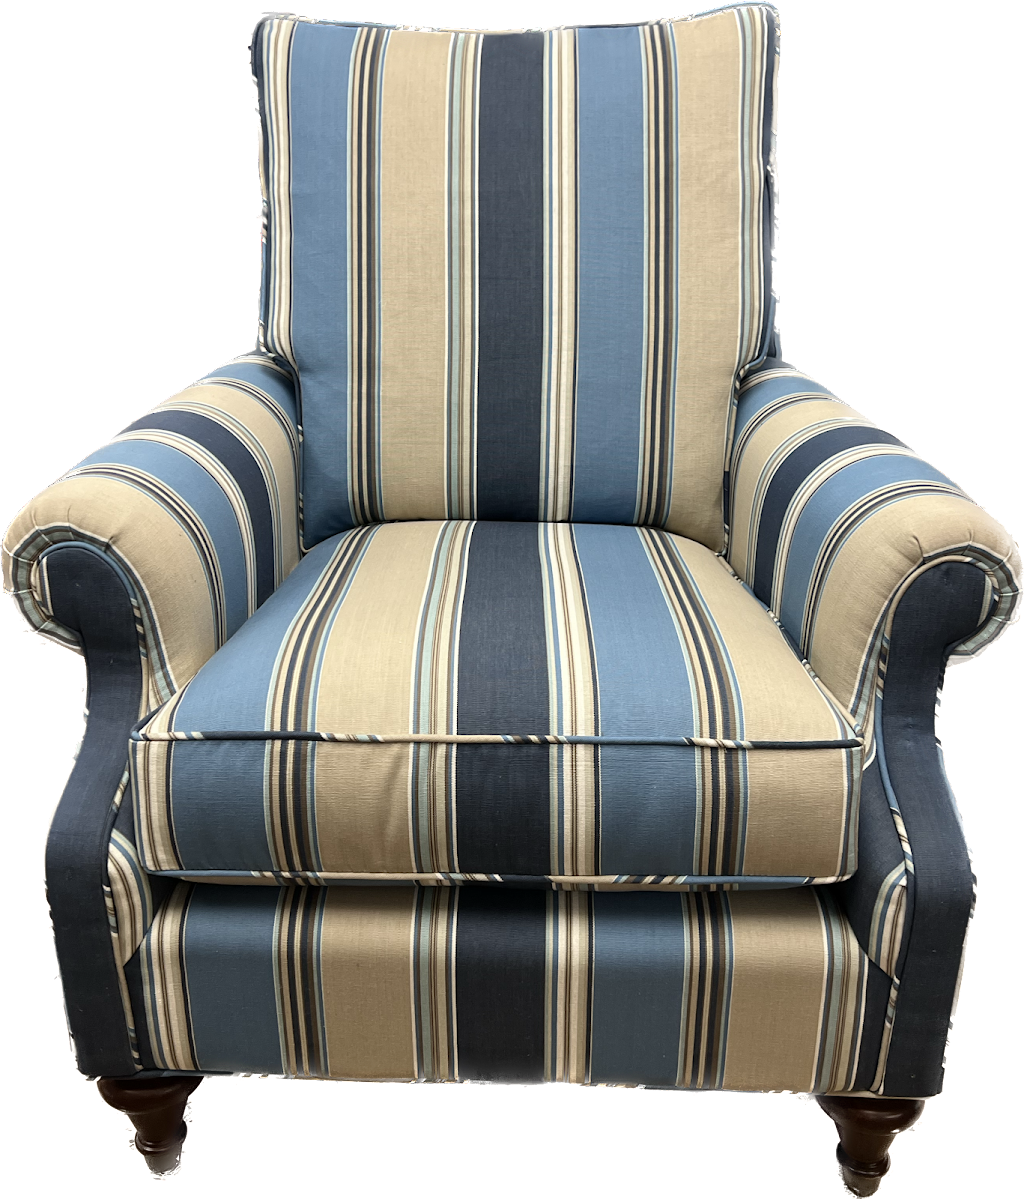 Obeda upholstery | 847 Piper Rd, West Springfield, MA 01089 | Phone: (413) 234-5570